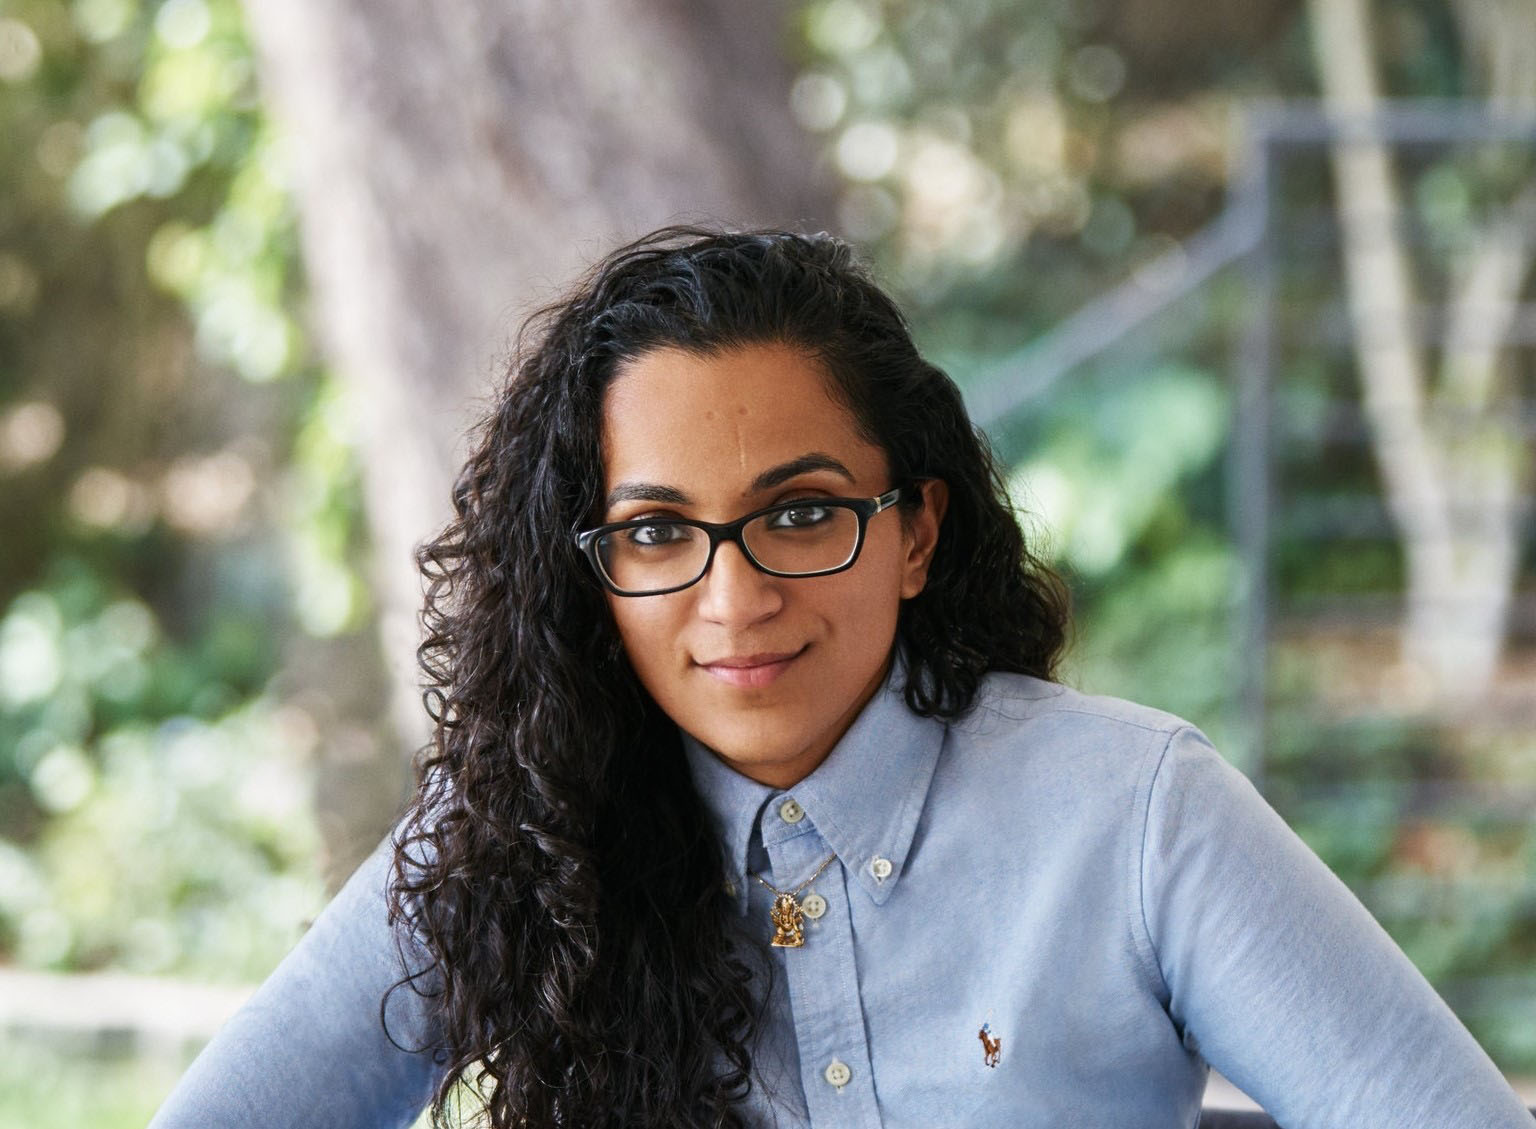 Photograph of Sonya Passi, a Brown woman with long wavy black hair. She wears a light blue buttonup shirt with a chain hanging under the color. She leans forward and smiles, arms on a table and fingers interlaced.